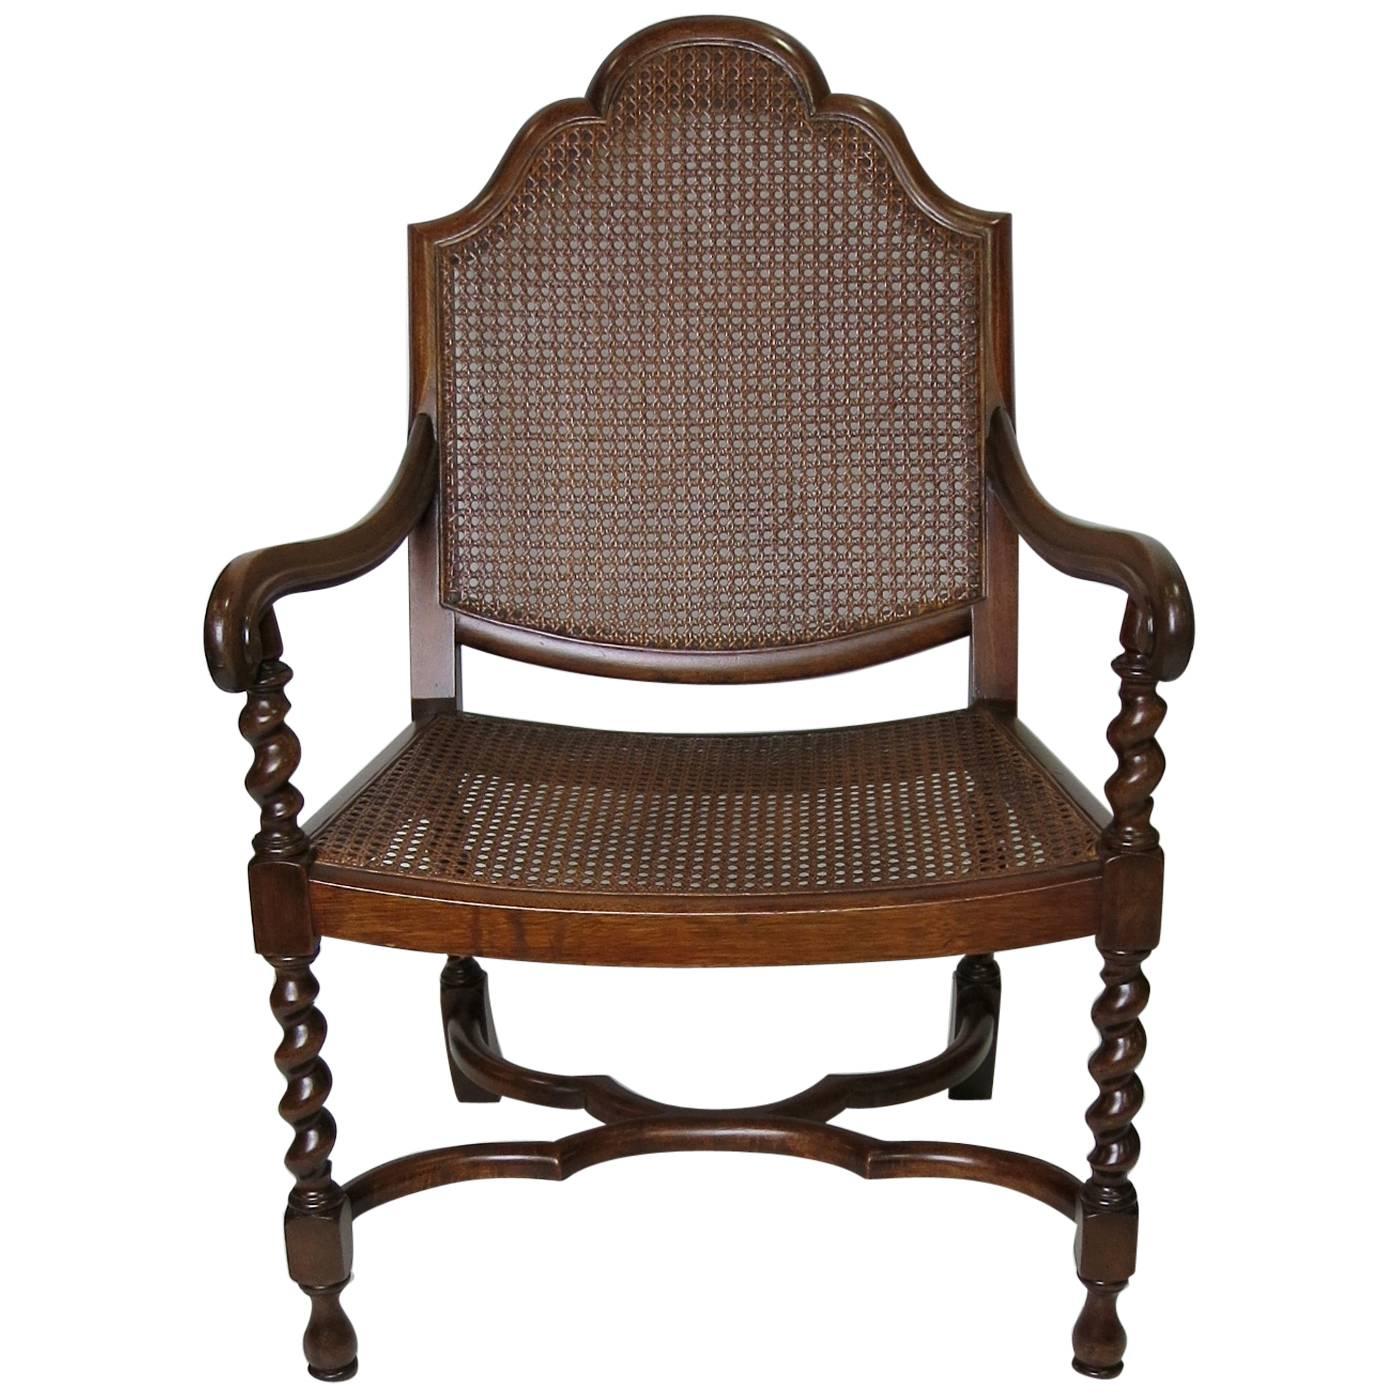 Exquisite Early 20th Century Mahogany and Cane Baroque Armchair